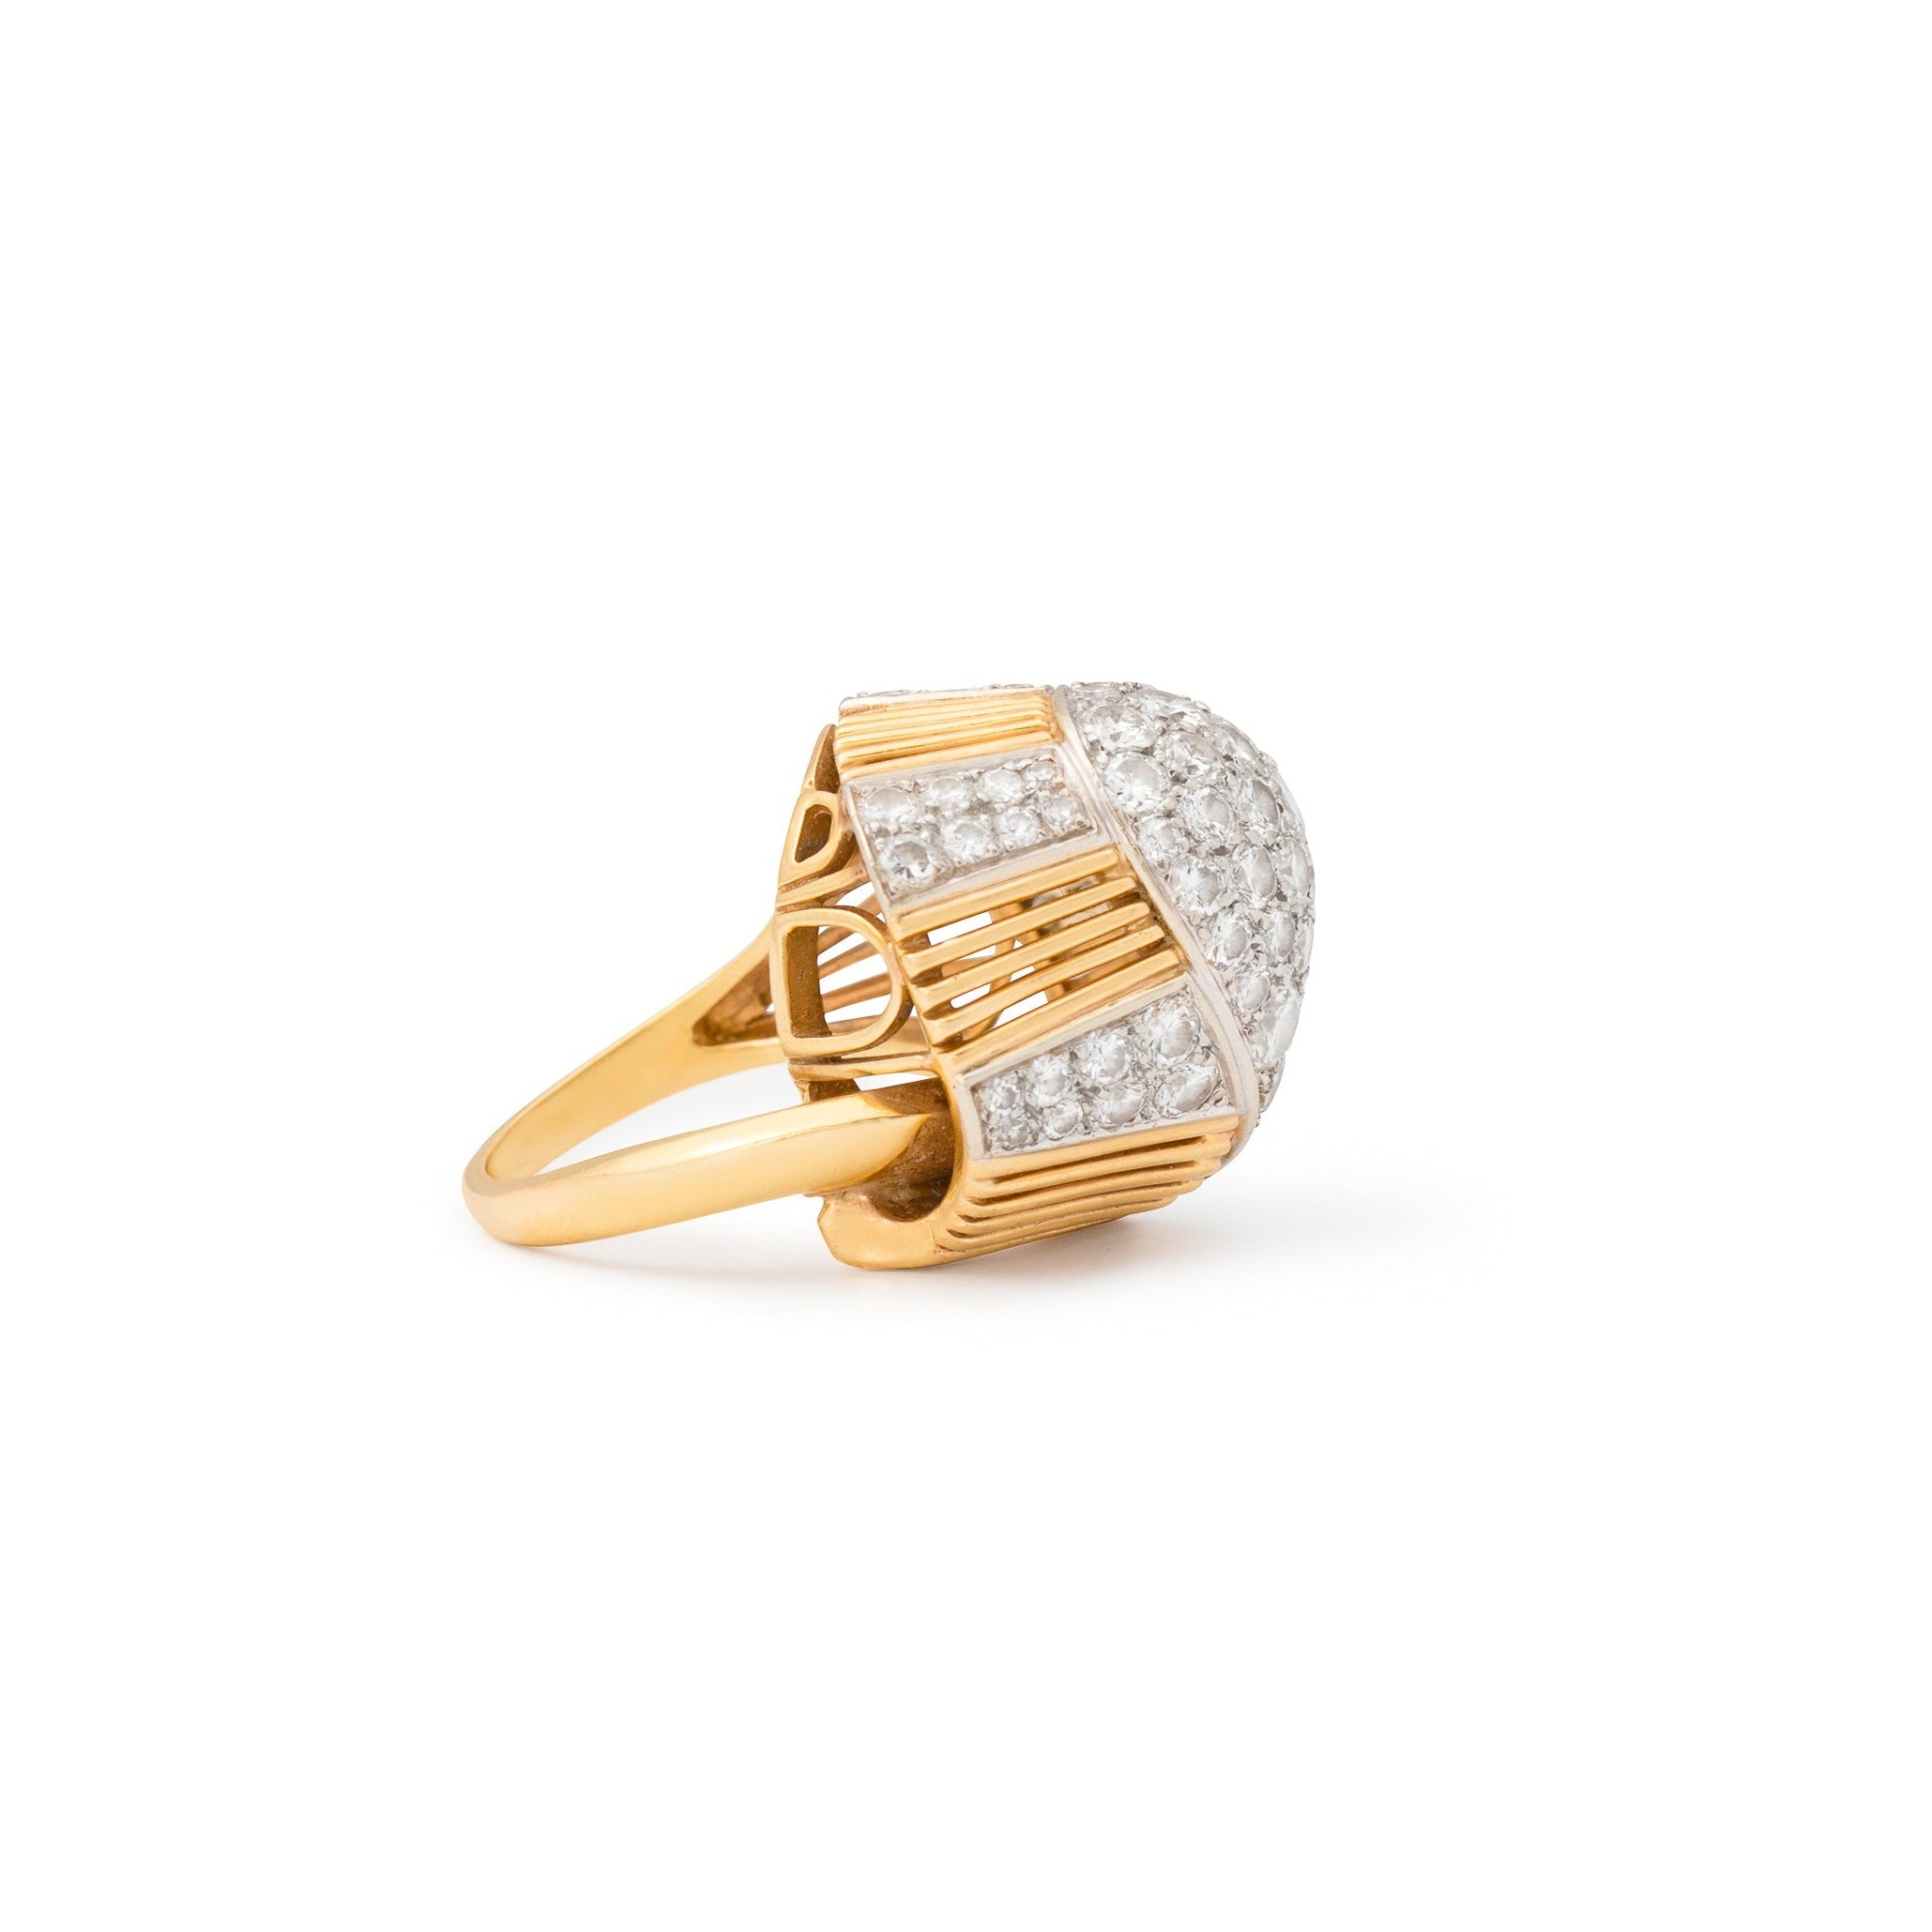 Pave Diamond And Bi-Color 14k Gold Bombe Dome Ring